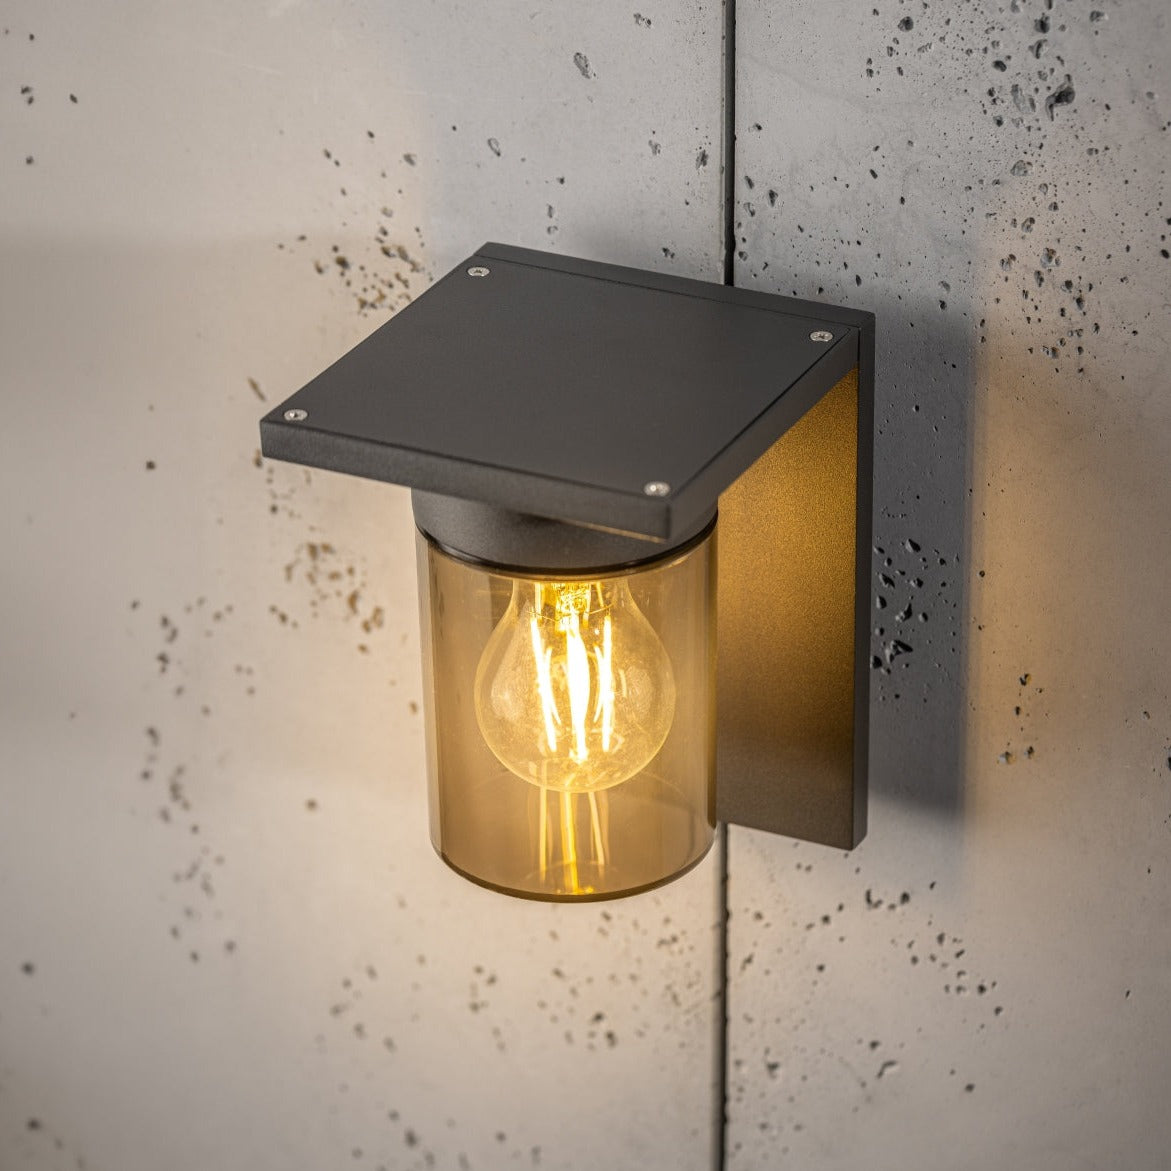 If you’re looking for a modern take on a traditional outdoor wall light, this&nbsp;anthracite wall light is perfect for adding style and protection for your home. This classic design with a contemporary twist, styled with a metal square shape and fitted with a smoked cylinder diffuser that allow the light to shine effectively